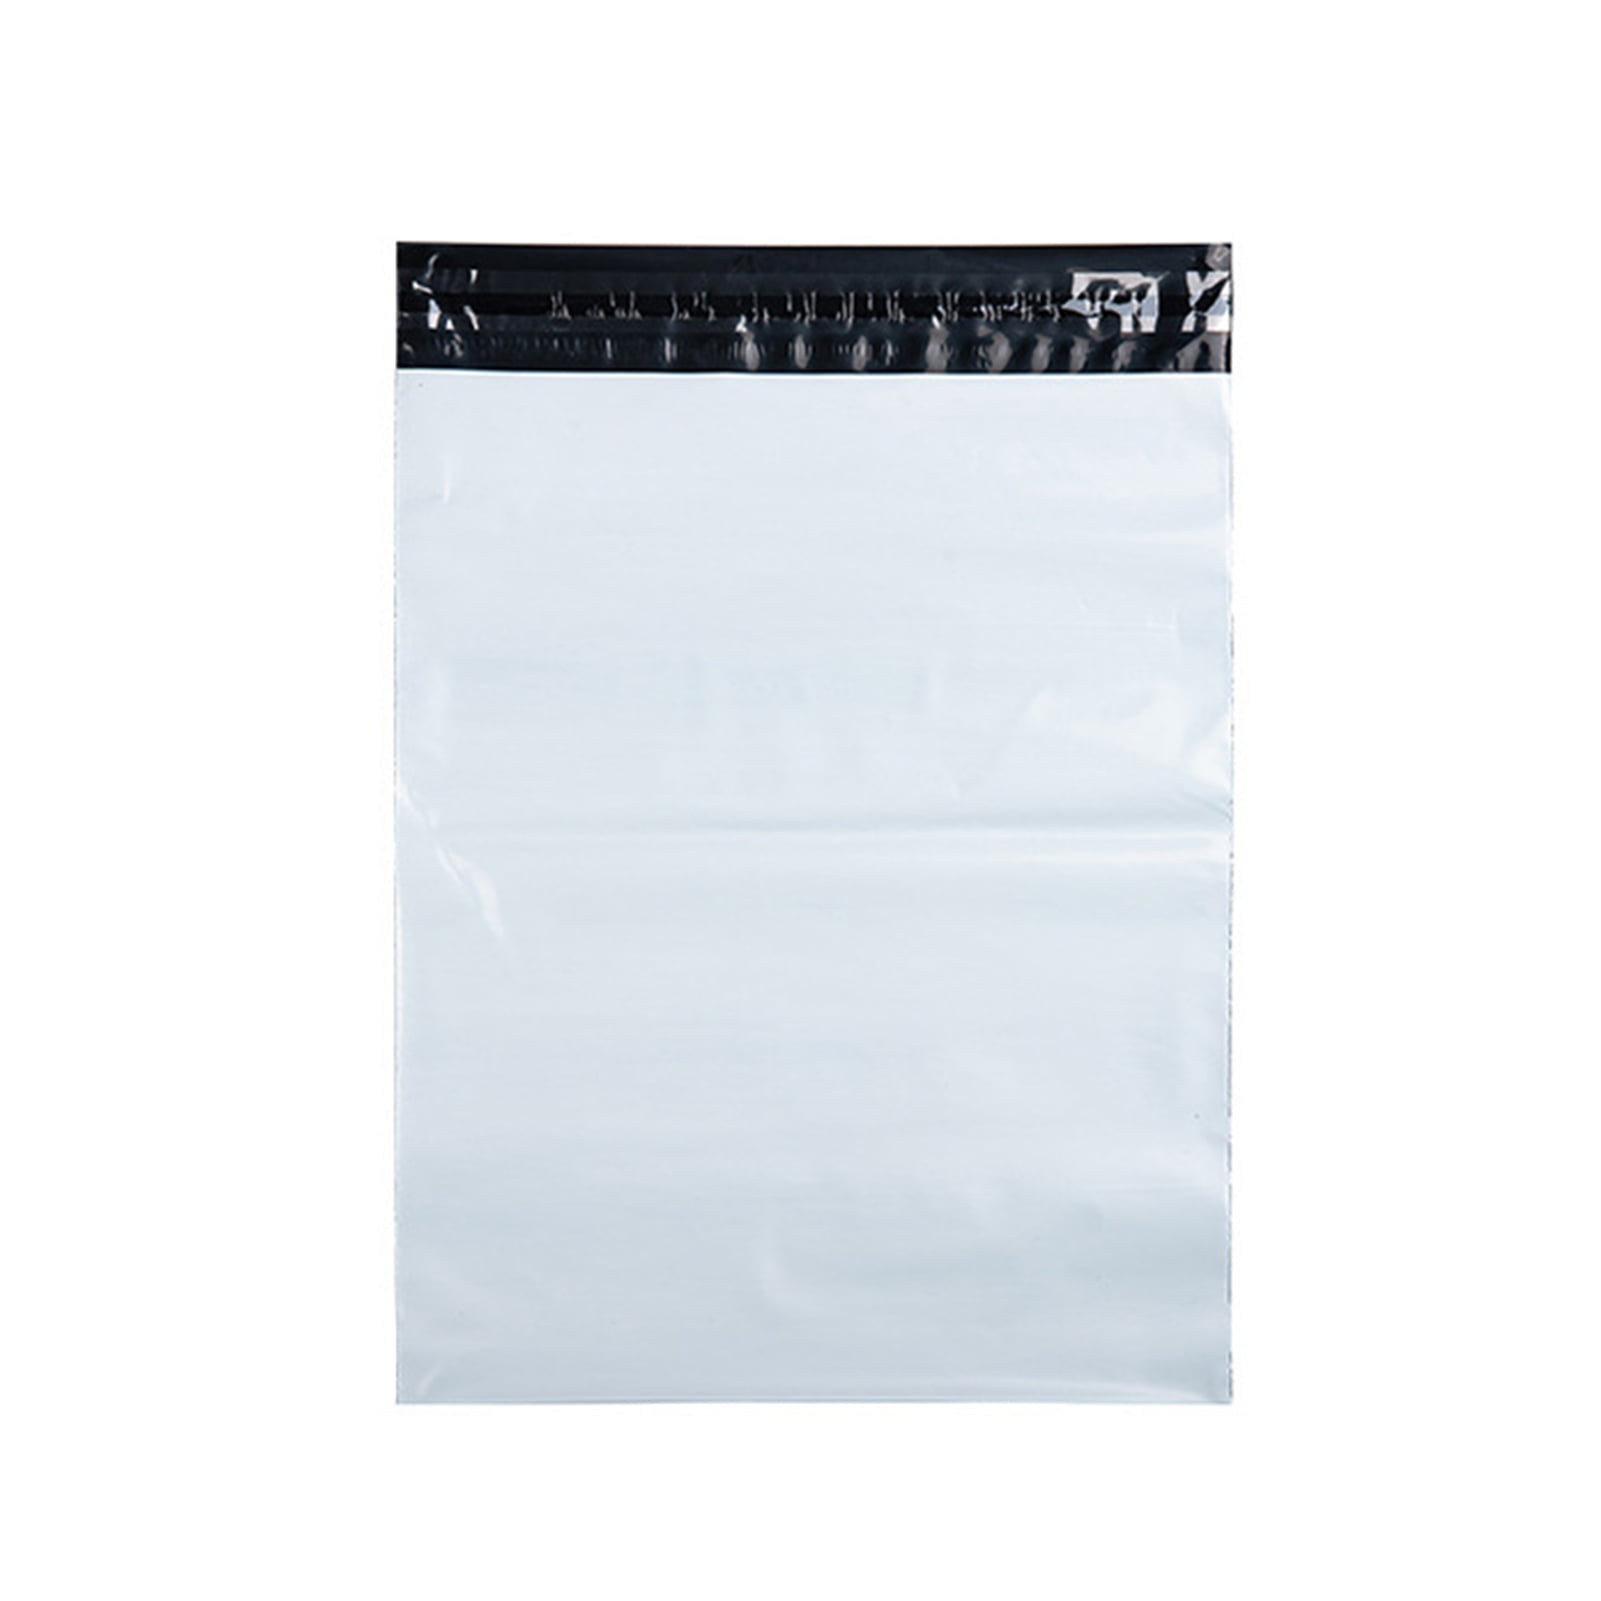 MAILING BAGS PLASTIC POLY POSTAGE POST PACKING STRONG SELF SEAL MAILER ALL SIZES 